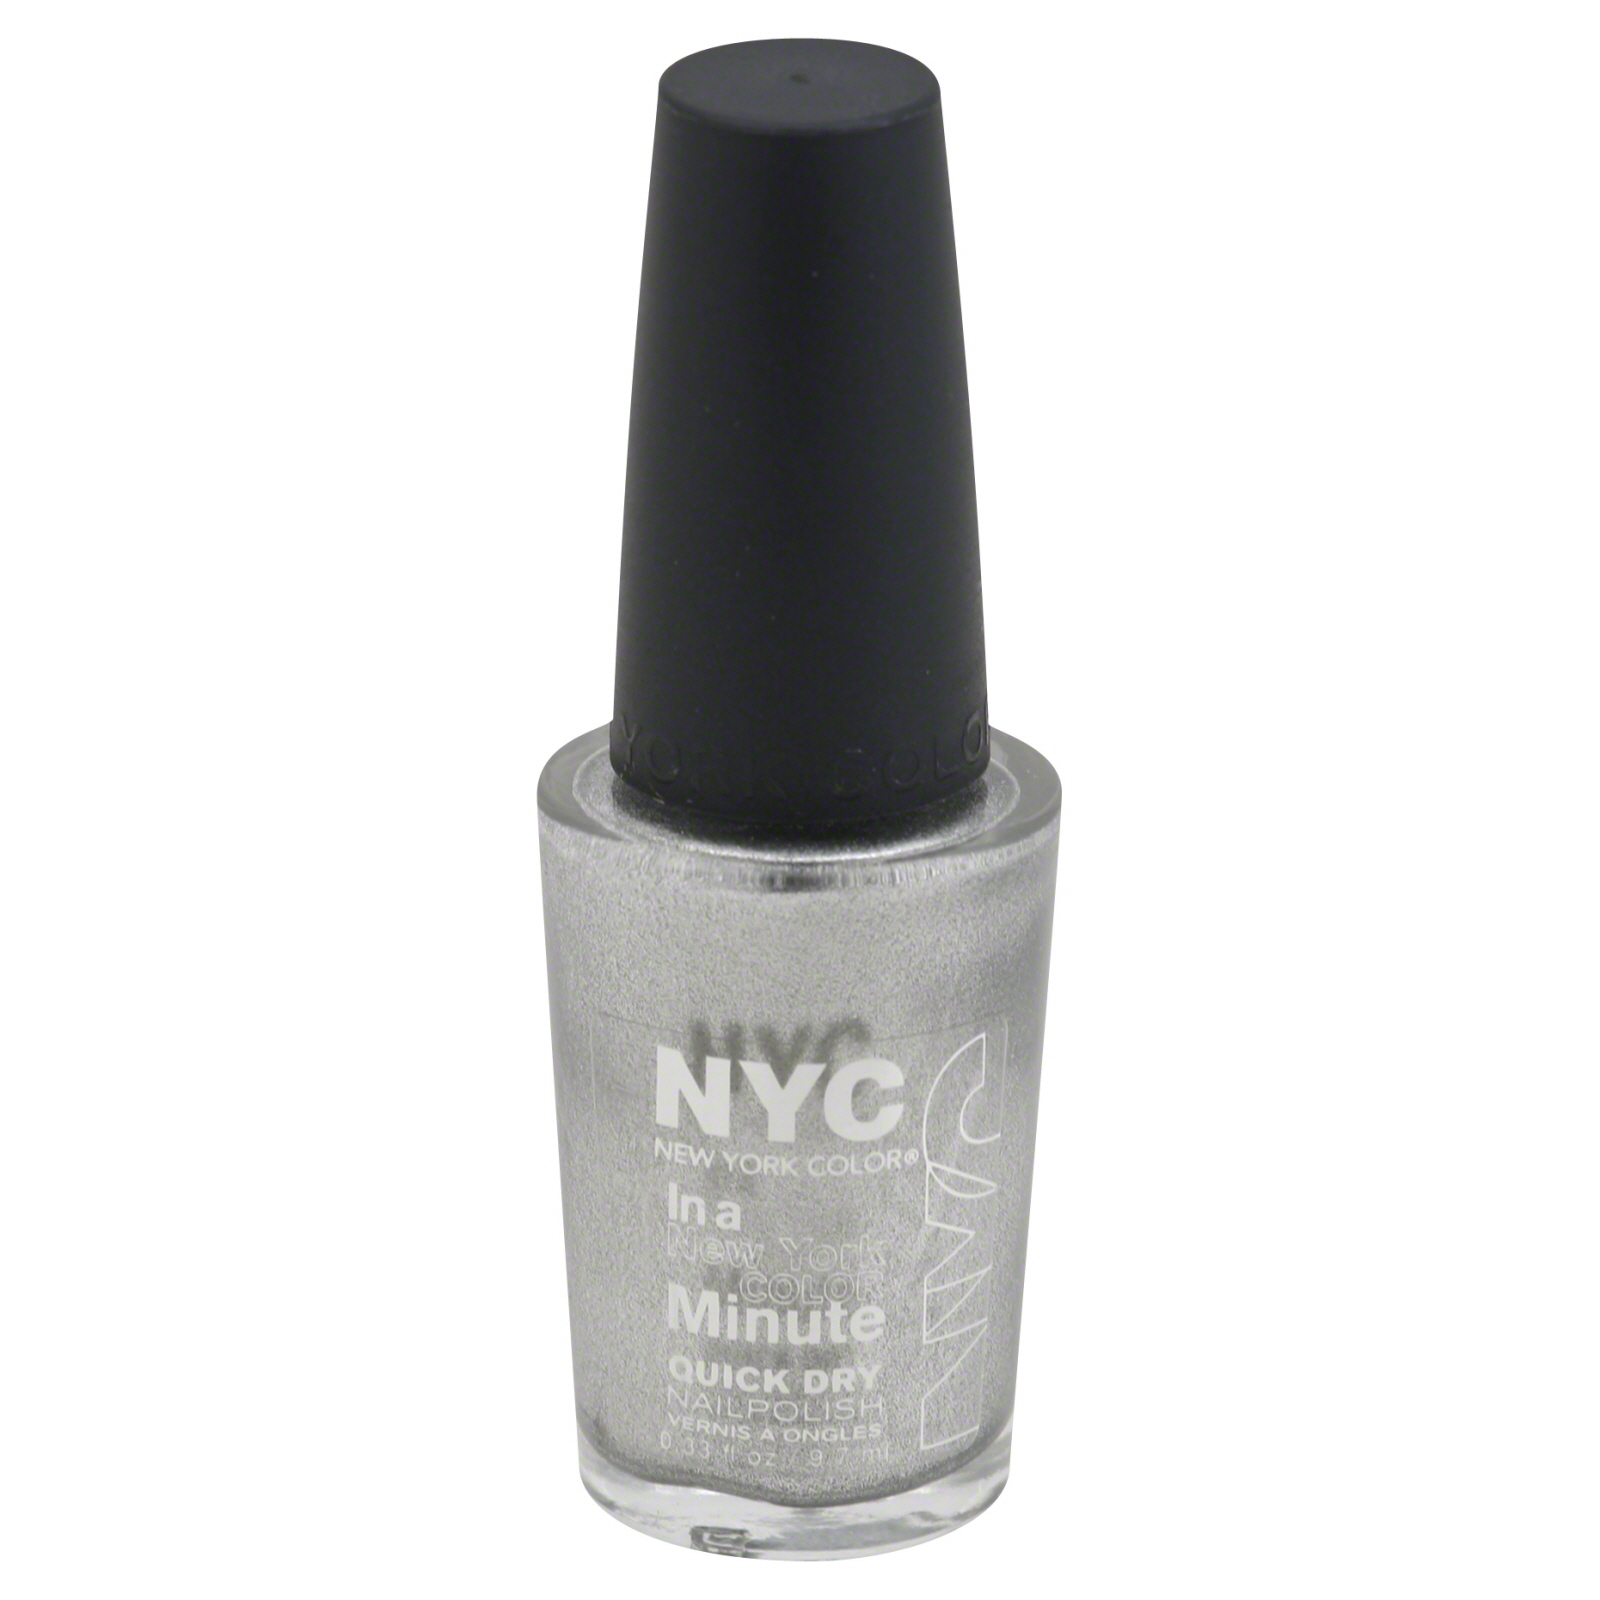 Nail Polish Quick Dry 'In a New York Color Minute'